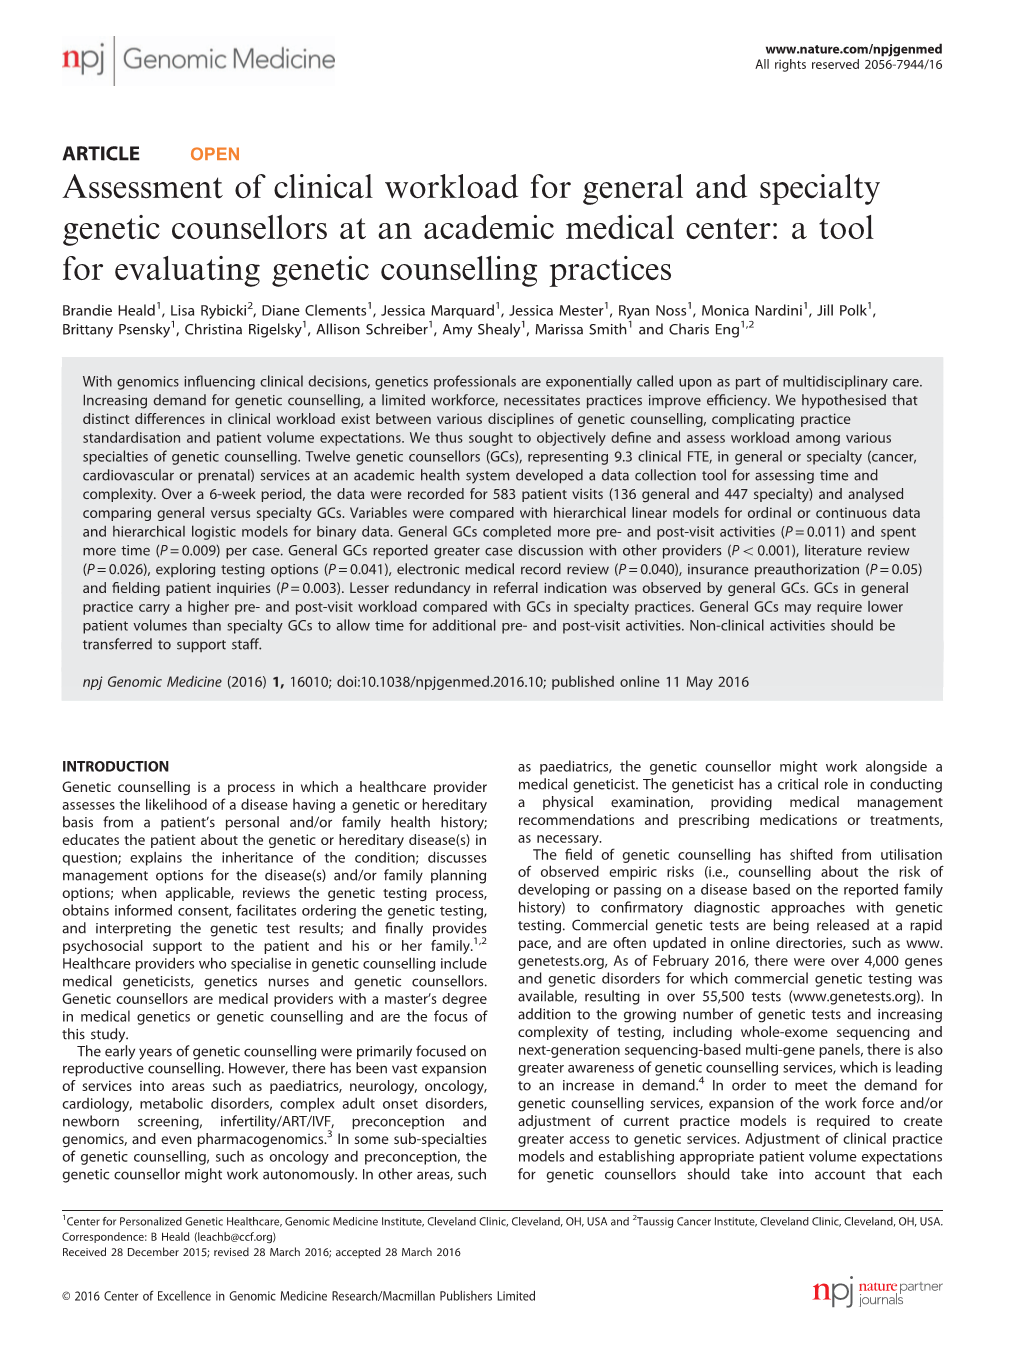 Assessment of Clinical Workload for General and Specialty Genetic Counsellors at an Academic Medical Center: a Tool for Evaluating Genetic Counselling Practices